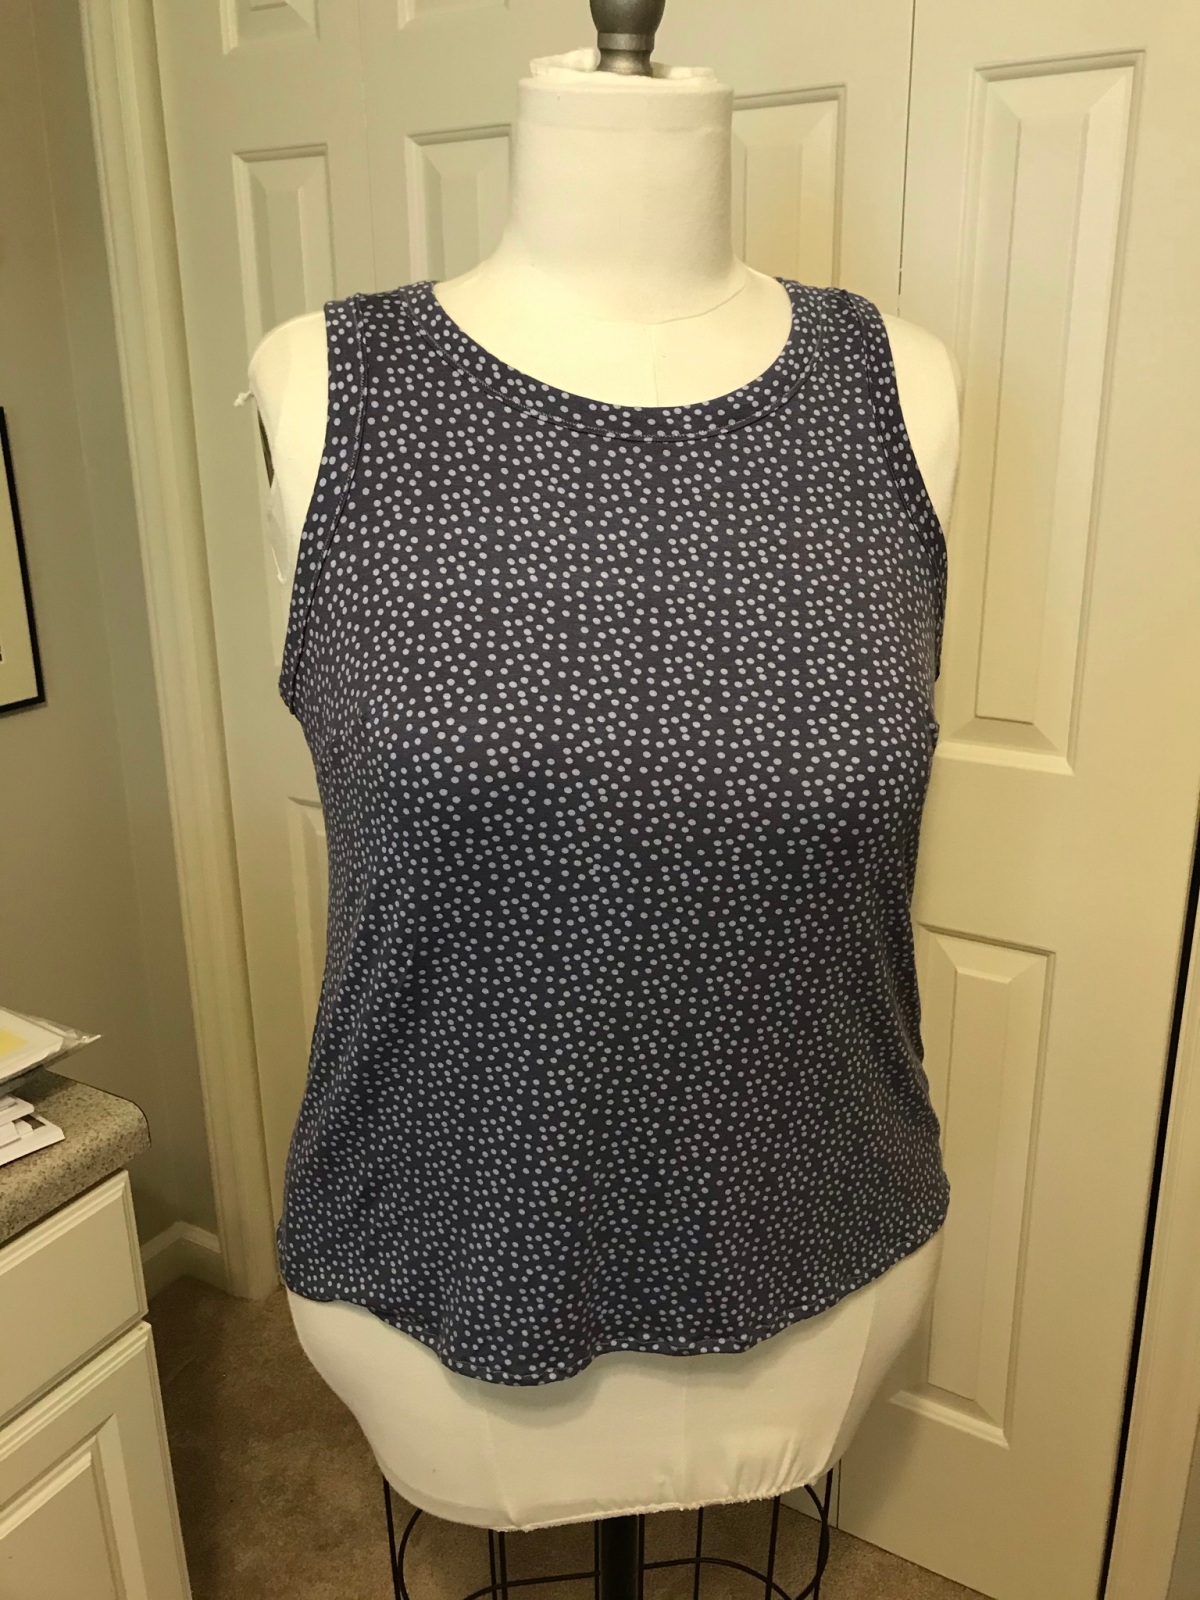 More Blomma Tank and a Blomma Dress! – Alice Sews